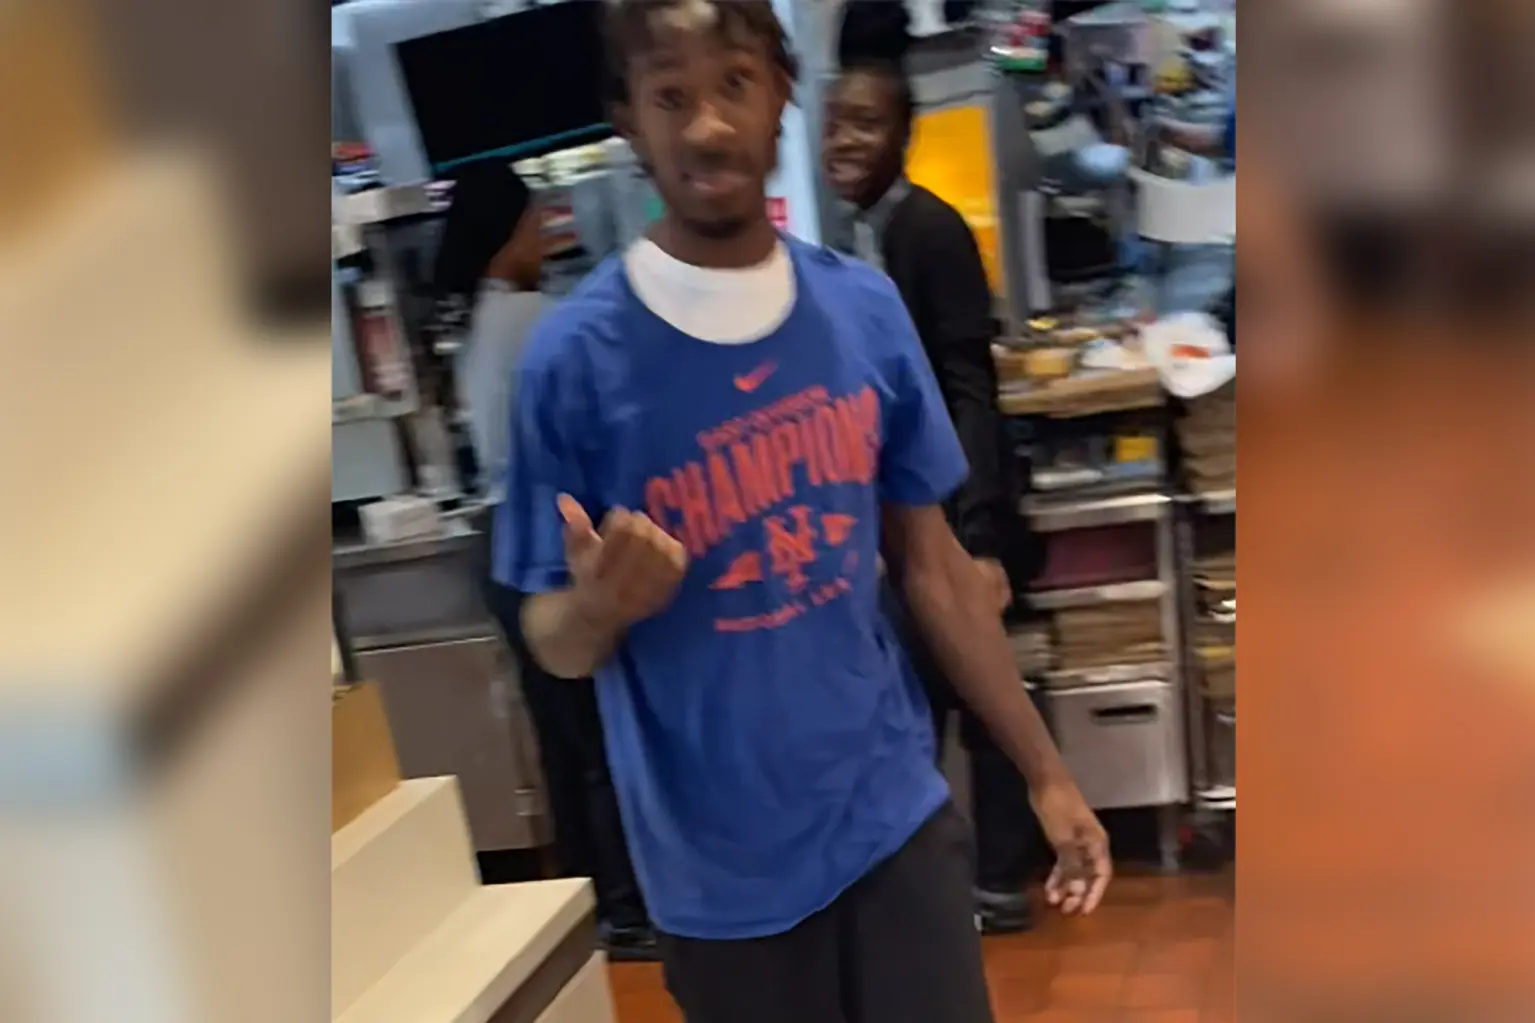 Woman gets served cold french fries, son shoots mcd worker in the neck | weirdkaya